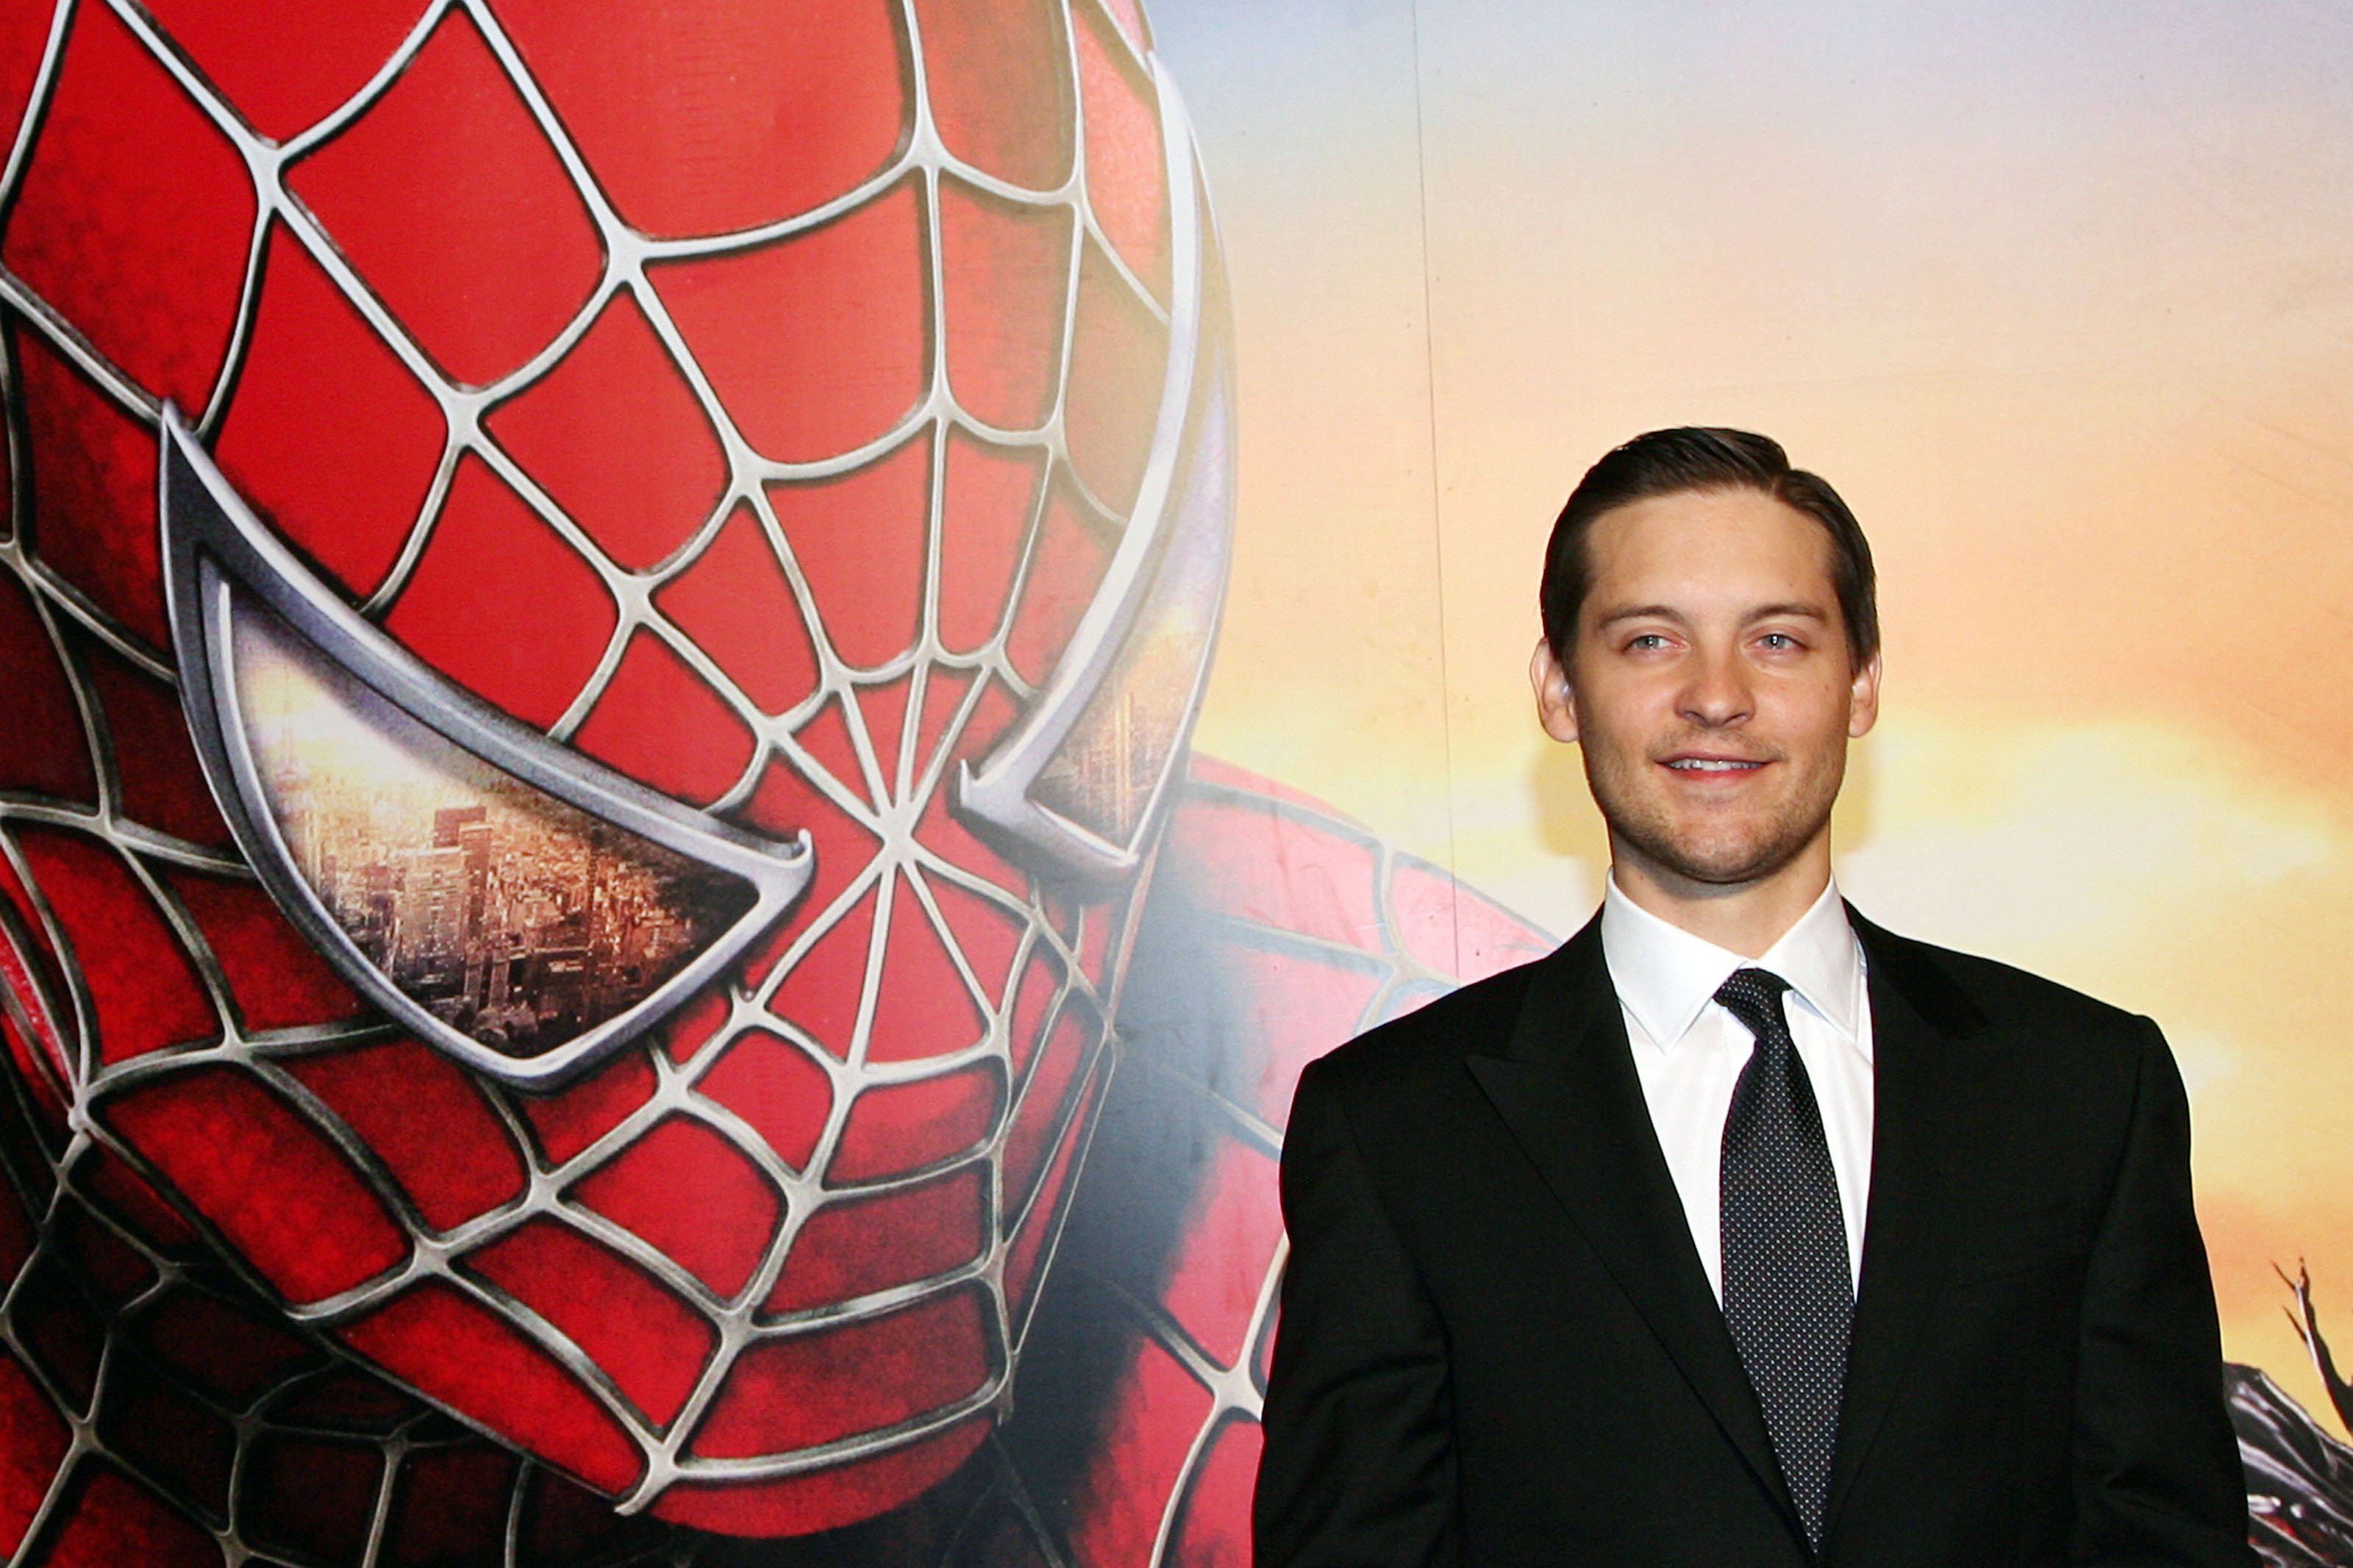 ‘Spider-Man: No Way Home’ Trailer: Why Aren’t Tobey Maguire and Andrew Garfield in it?